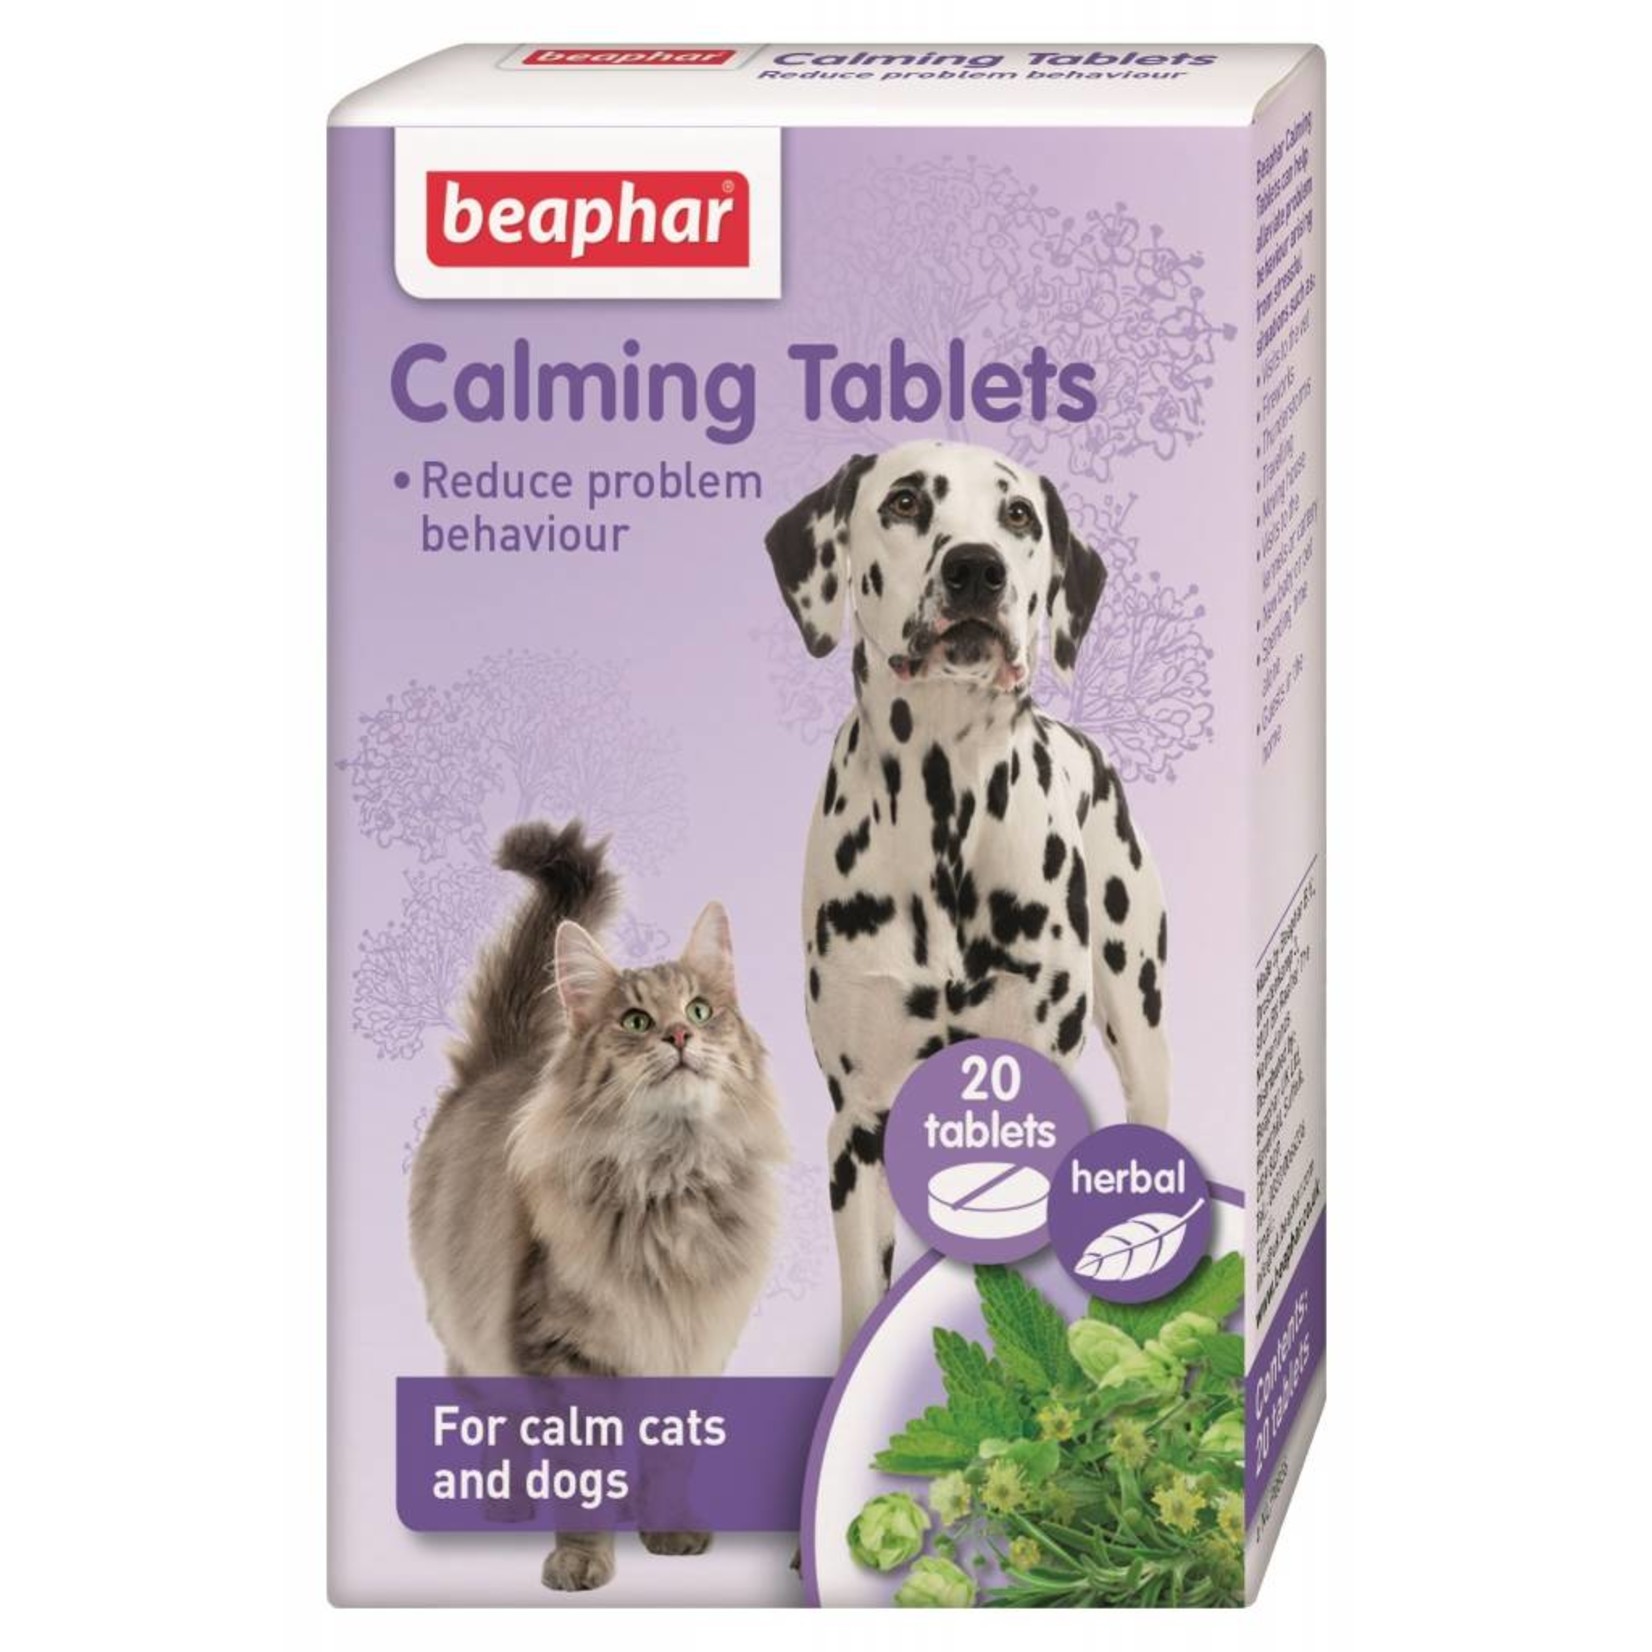 Beaphar Calming Tablets for Cats & Dogs